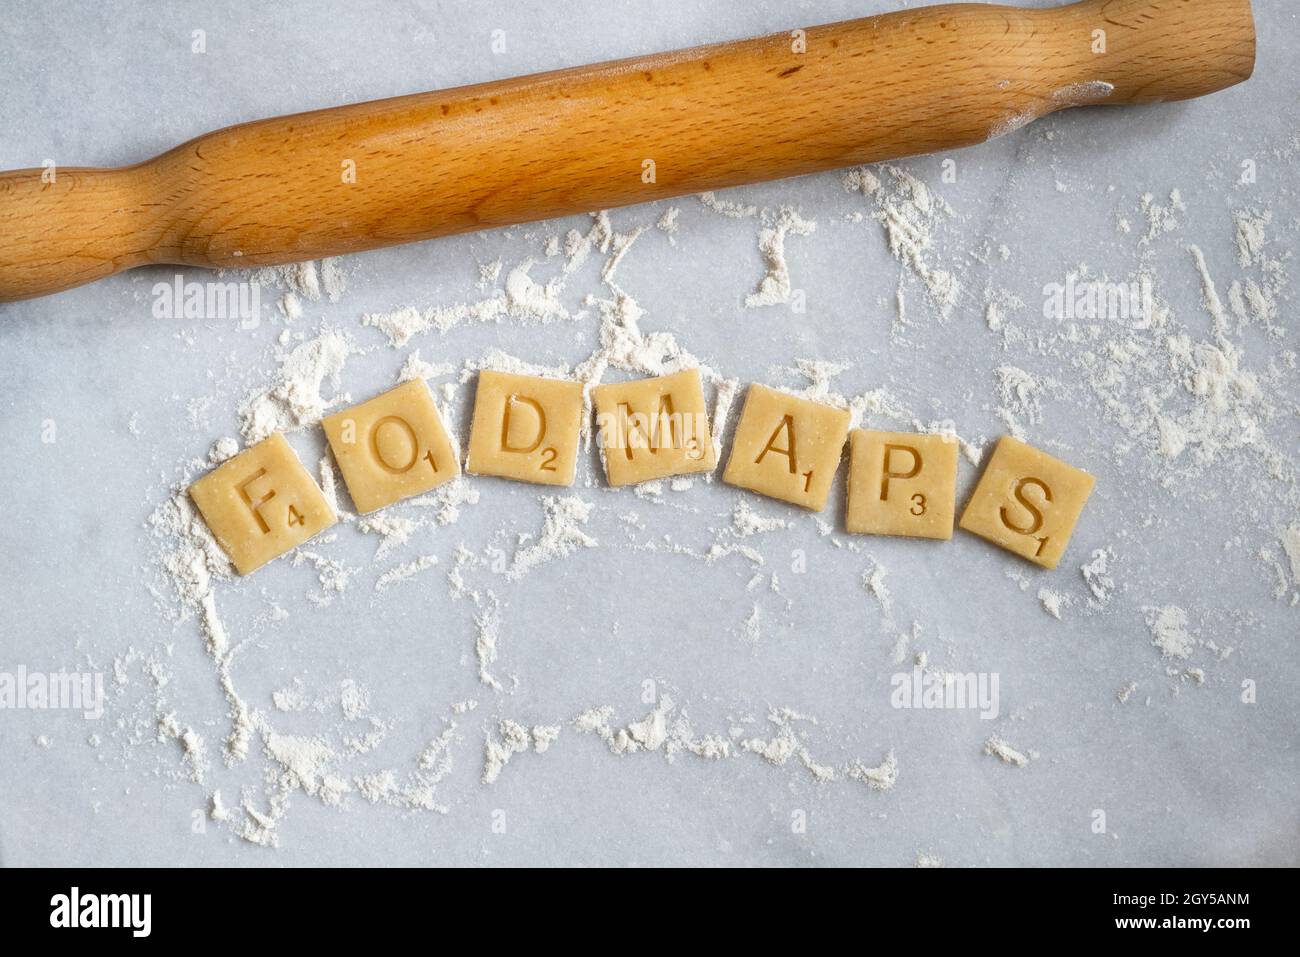 Wheat pastry squares spelling out 'Fodmaps'. Stock Photo